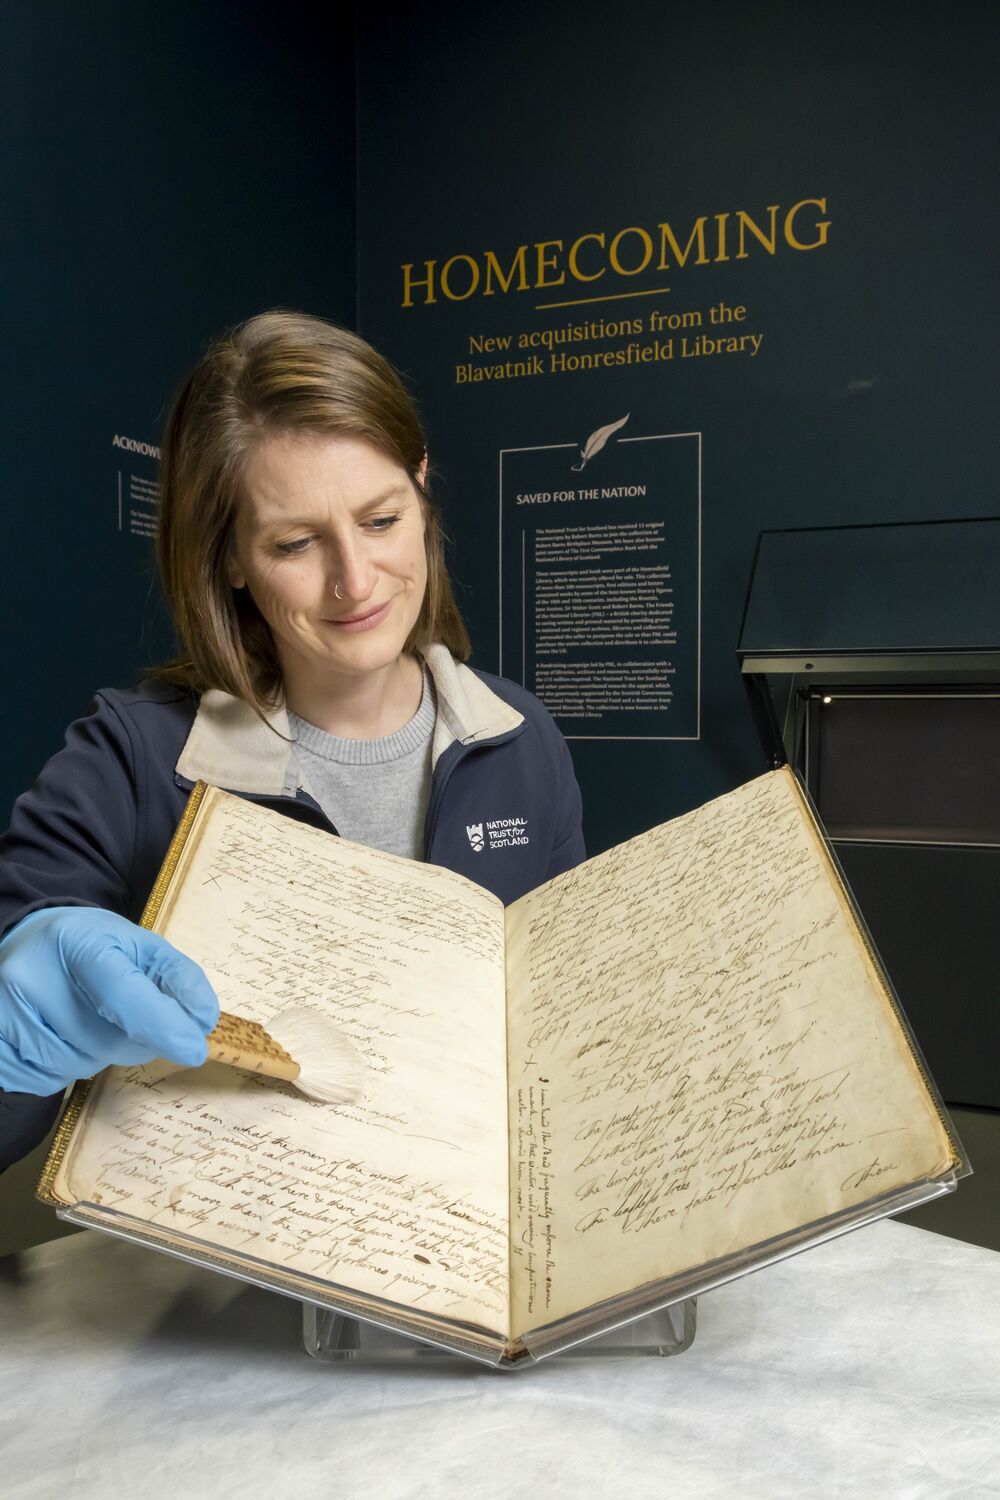 A smiling lady holds open a large book, filled with Burns's handwritten notes, and shows it to the camera. She holds a small brush in one hand and wears blue nitrile gloves.